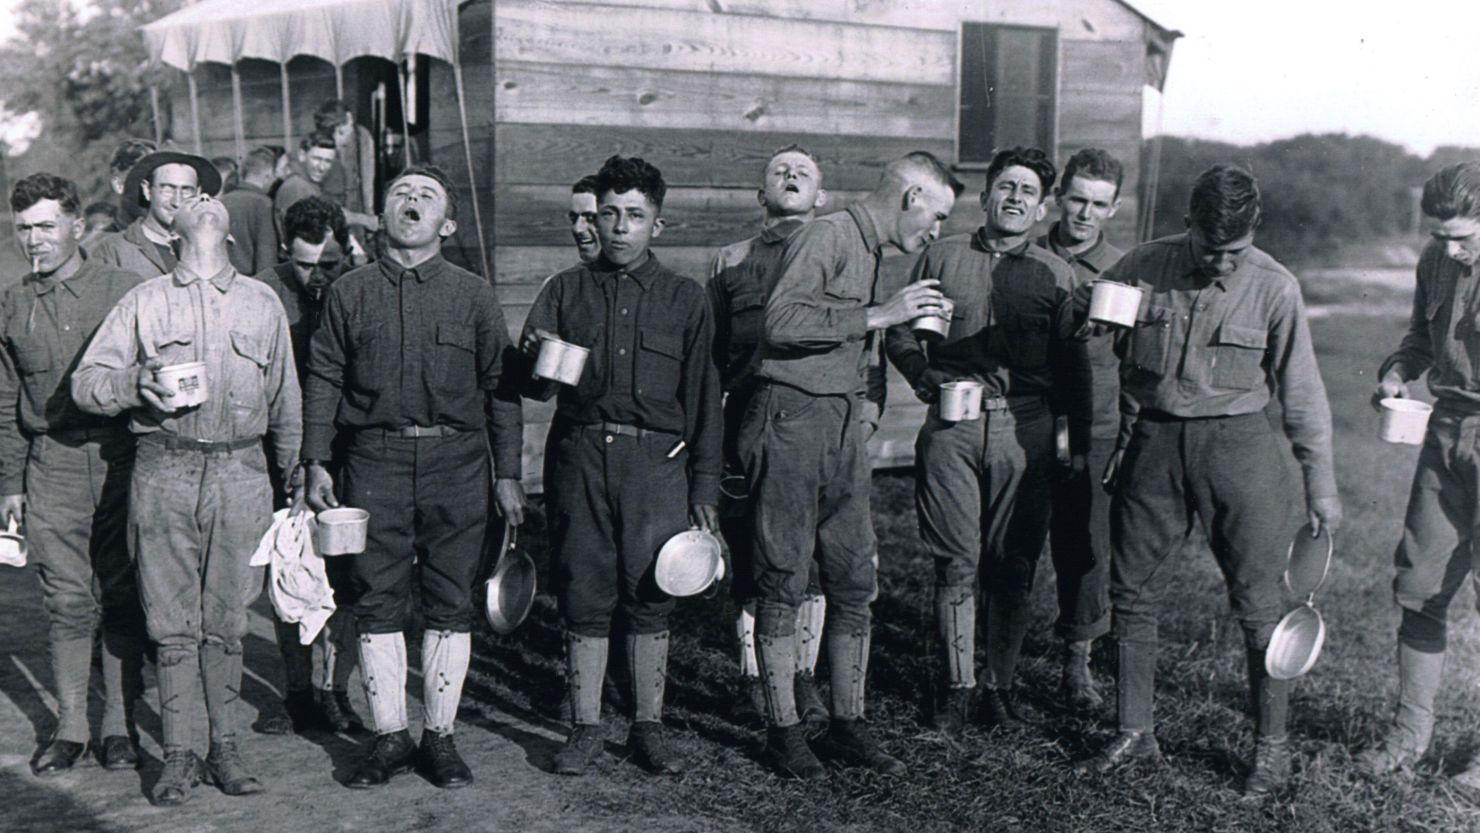 In September 1918 during the influenza pandemic, these men gargled salt water after a day working at Camp Dix in New Jersey. This was a preventative measure against the 1918 flu, which had spread to army camps. 